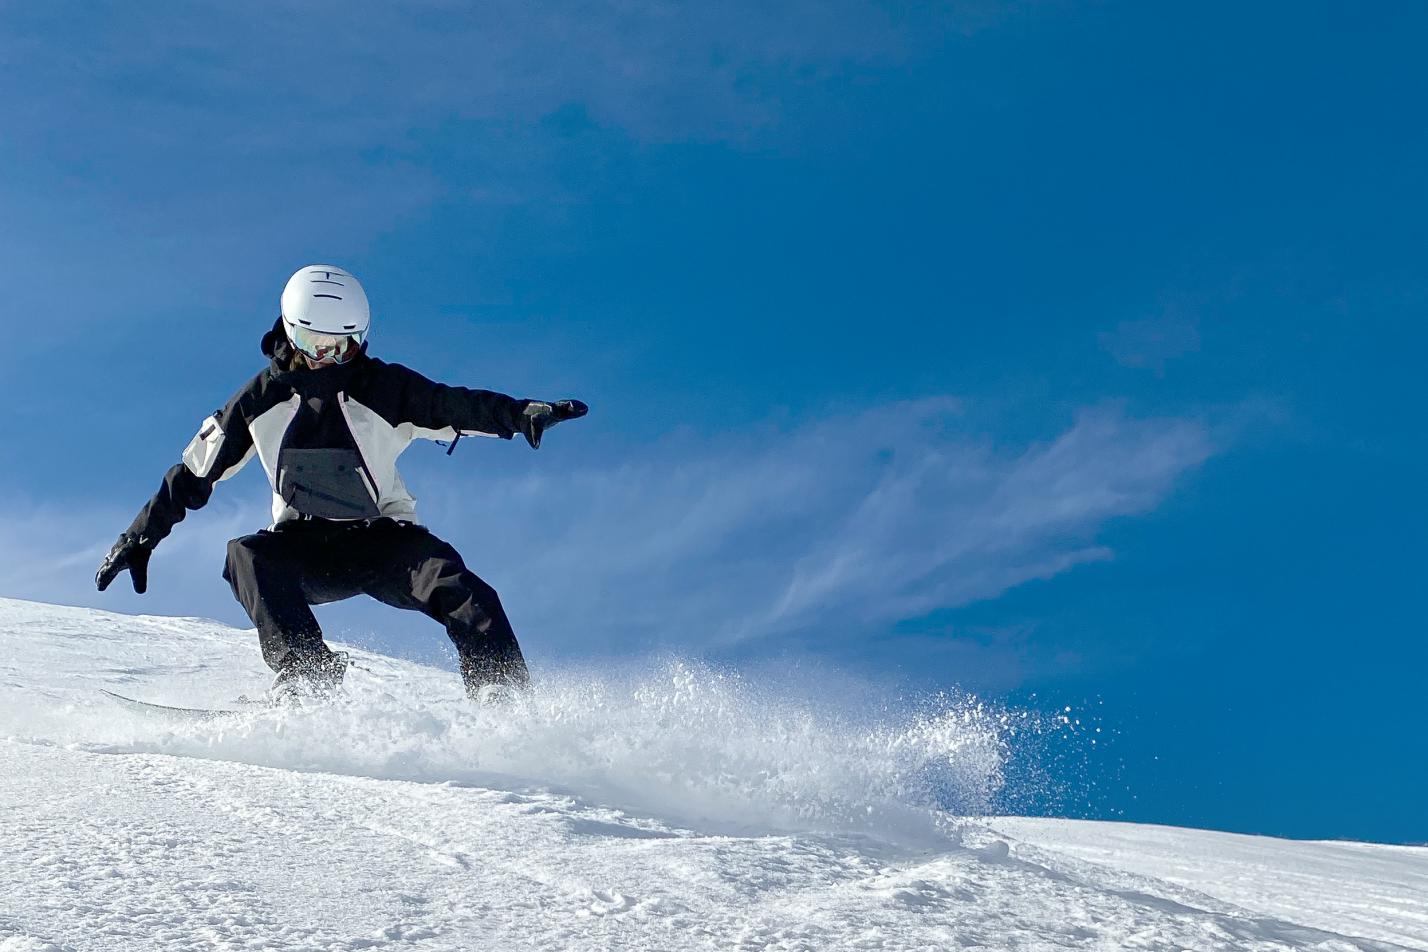 Which Ski Resort Gets the Most Snow？